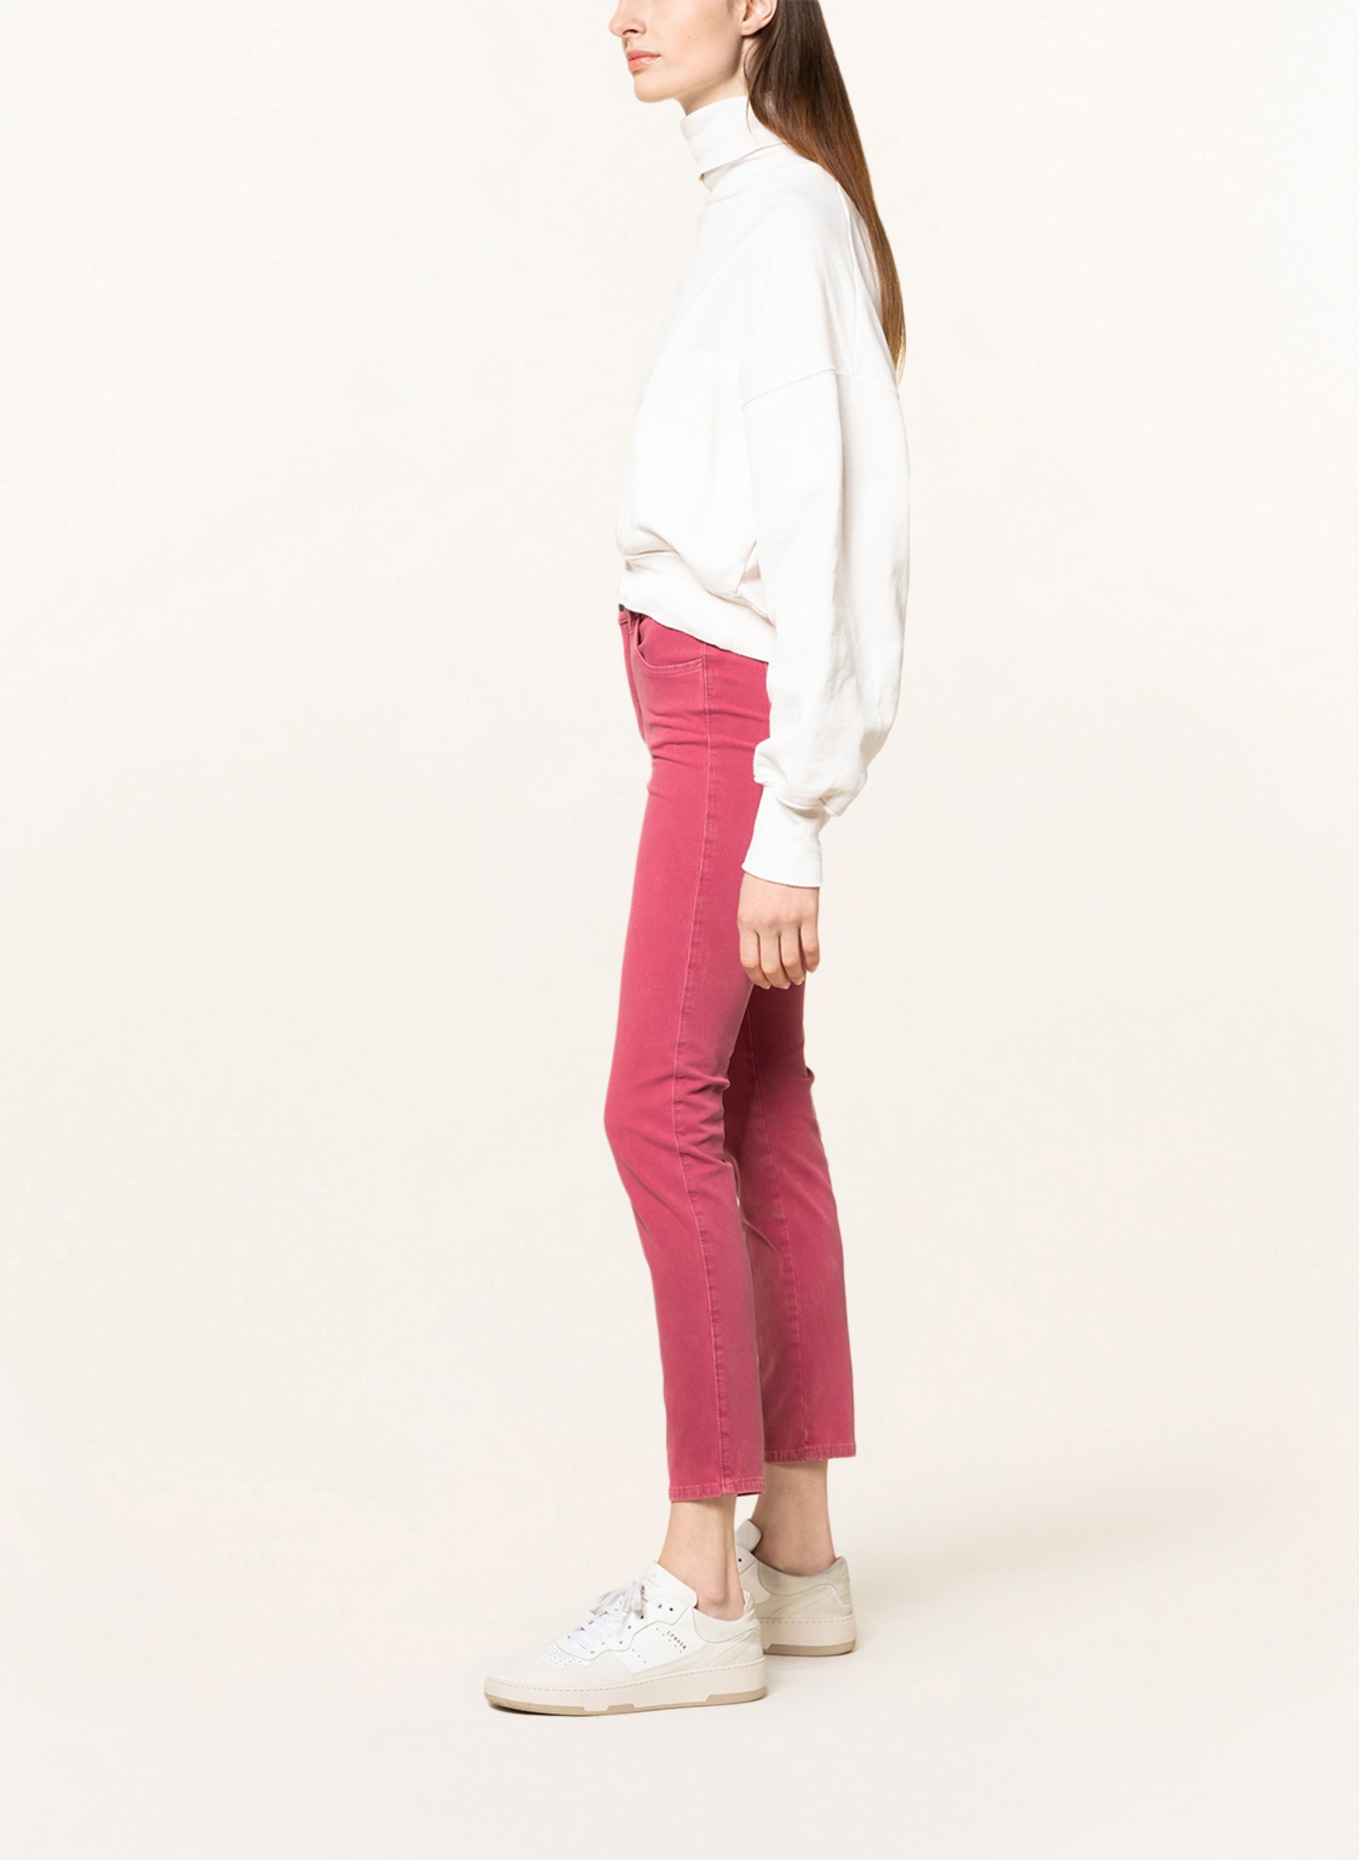 ITEM m6 7/8 skinny Jeans POWER PANTS with shaping effect, Color: 760 moody berry (Image 4)